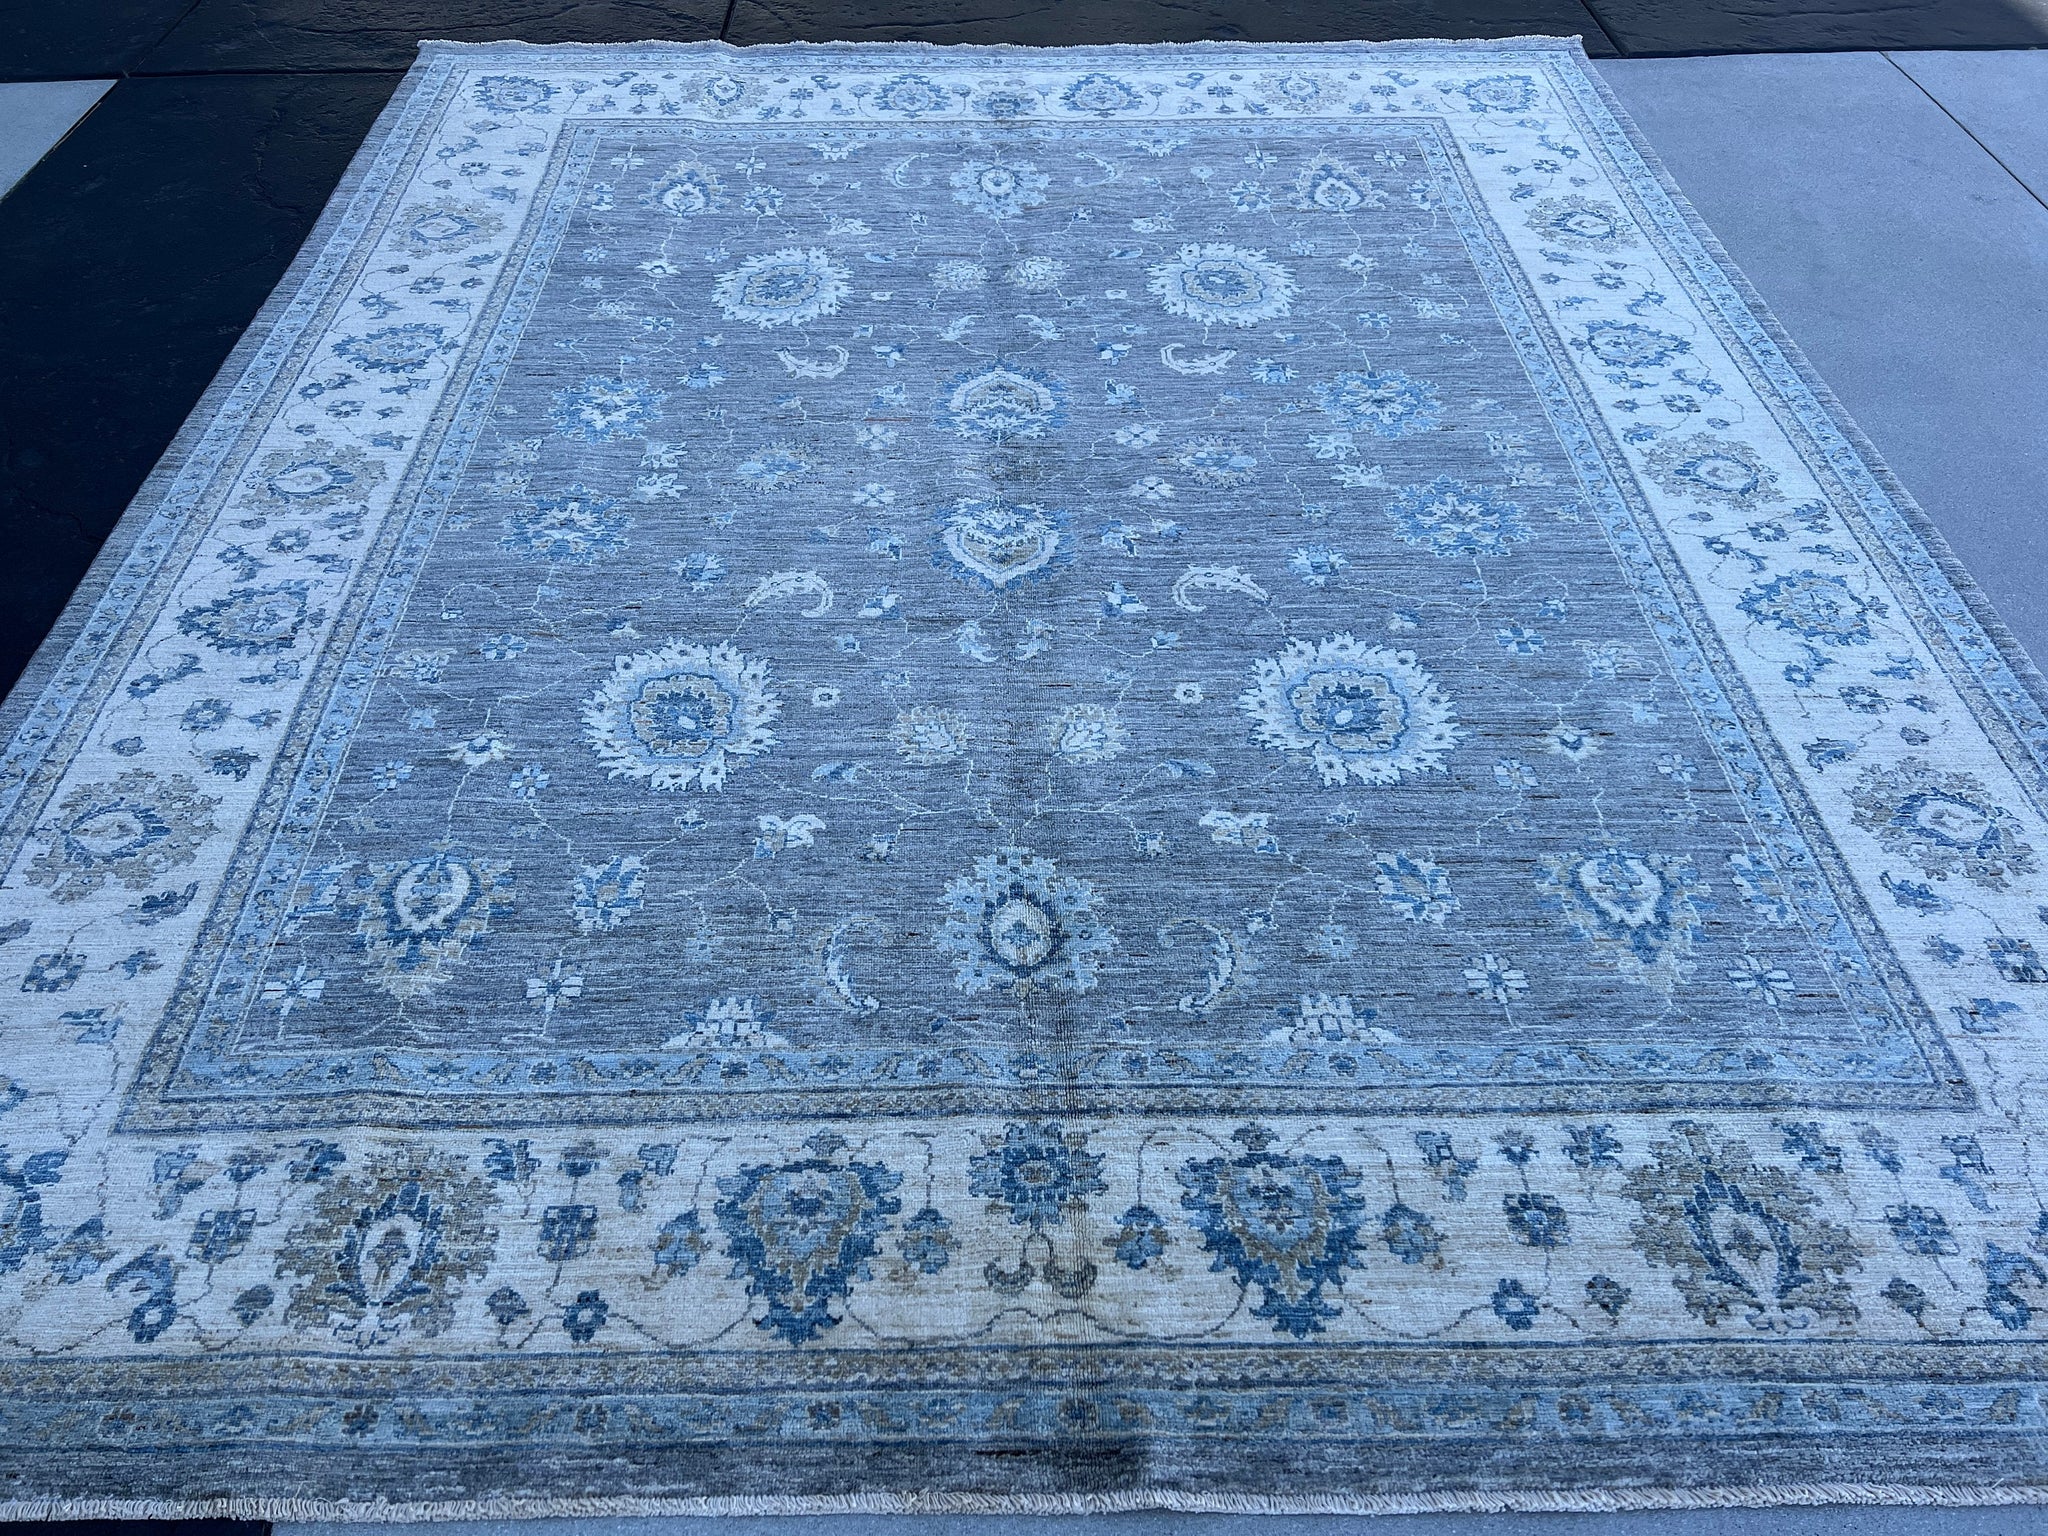 8x10 (245x305) Handmade Afghan Rug | Muted Charcoal Grey Cream Beige Teal Blue Turquoise Sage Green | Tribal Floral Wool Boho Hand Knotted